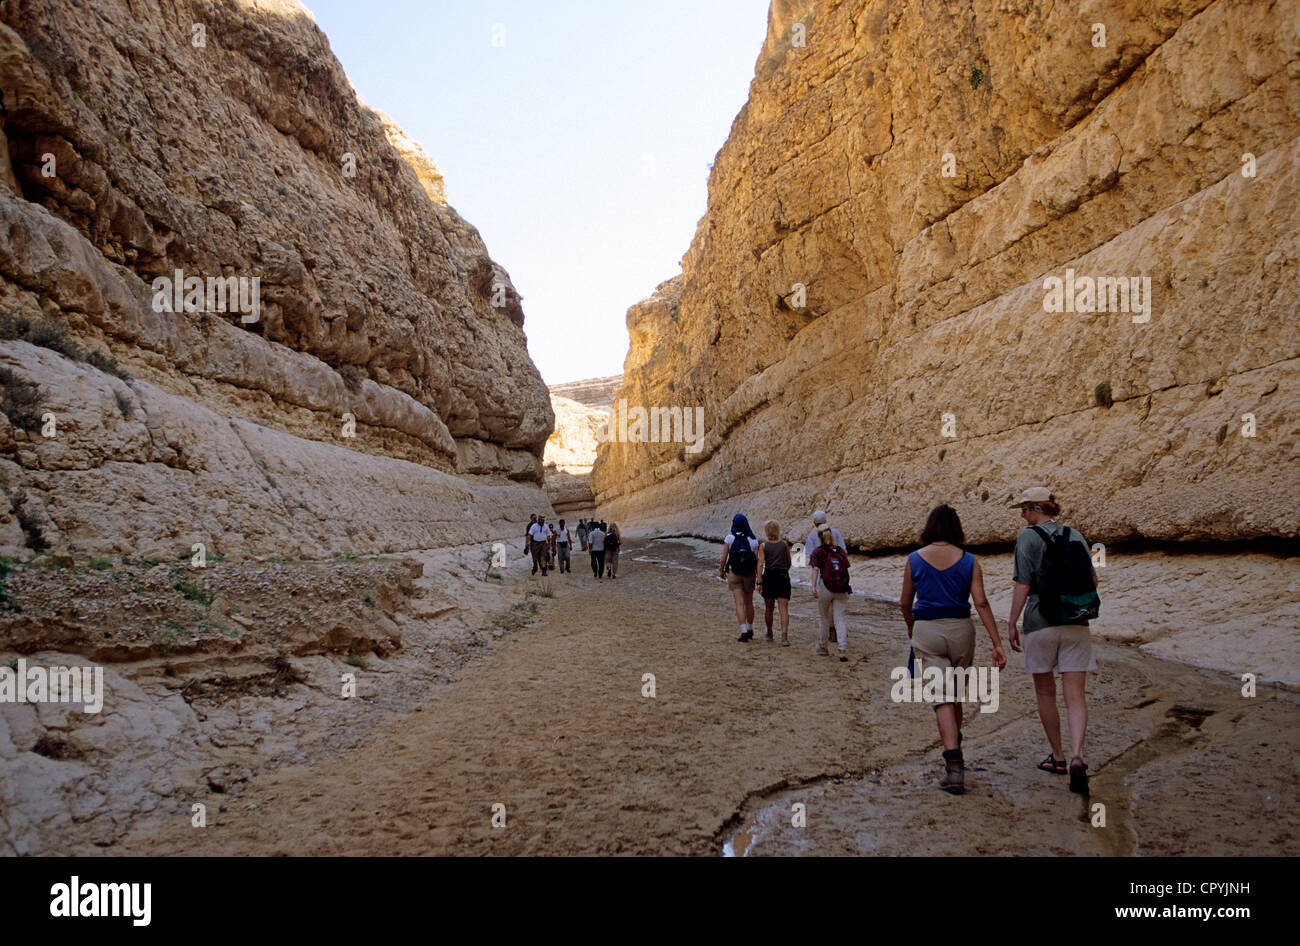 Tunisia, Tozeur Governorate, Mides Gorges, near Tamerza, not far from the border with Algeria, hikkers Stock Photo